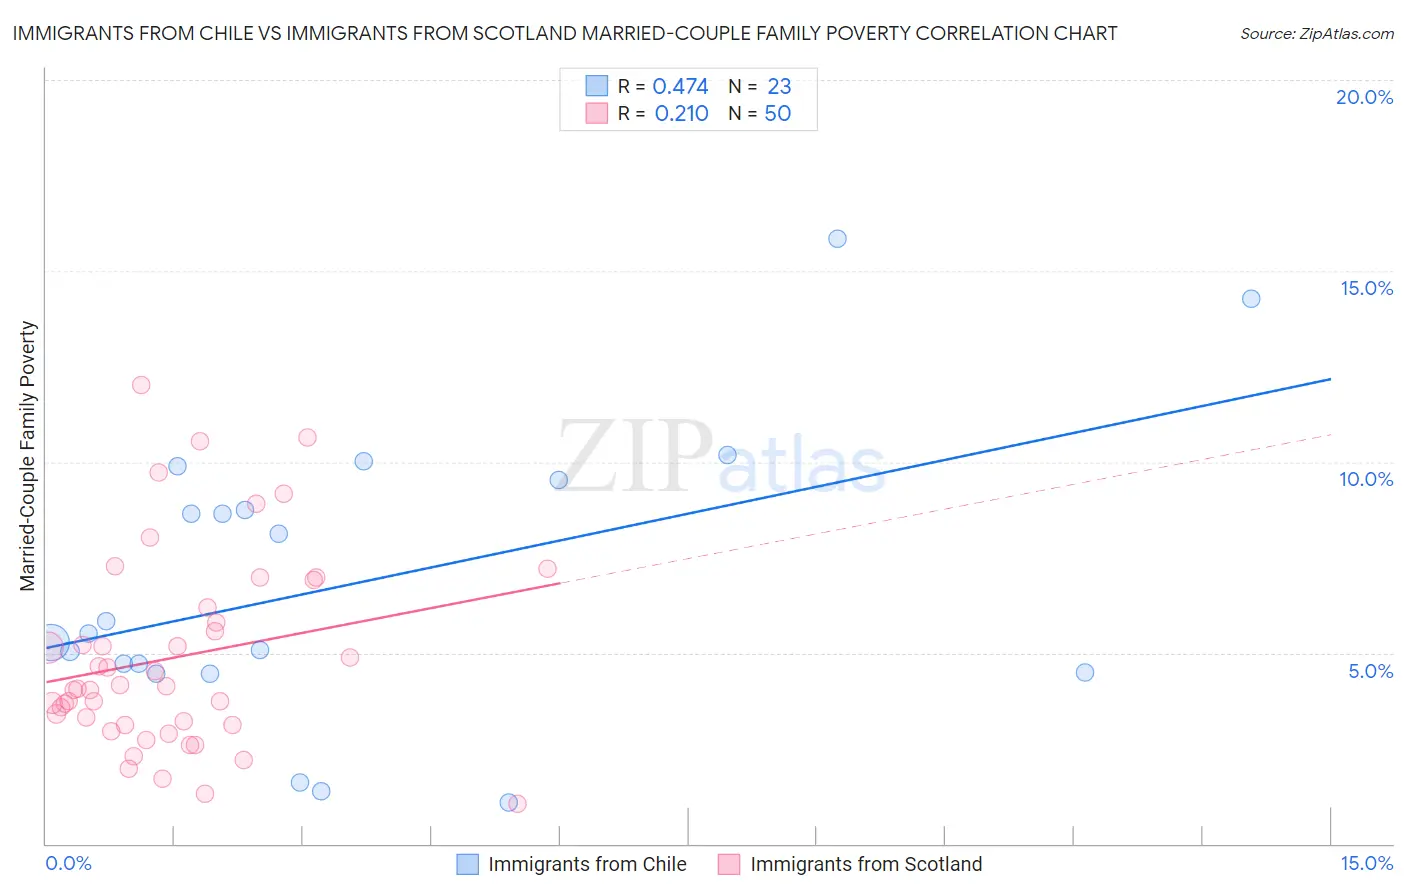 Immigrants from Chile vs Immigrants from Scotland Married-Couple Family Poverty